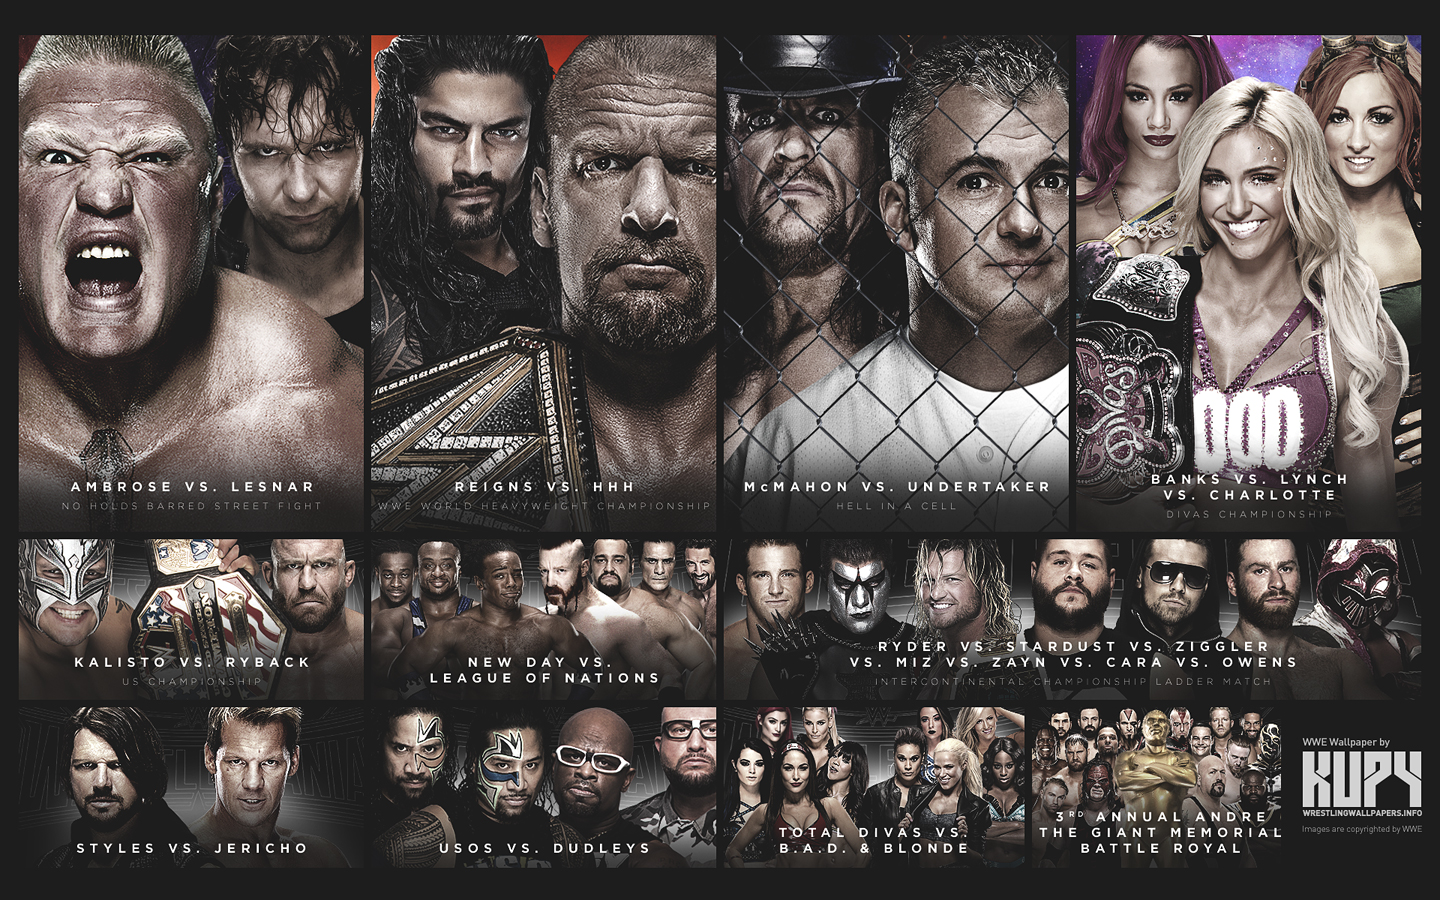 Wwe Image Wrestlemania HD Wallpaper And Background Photos